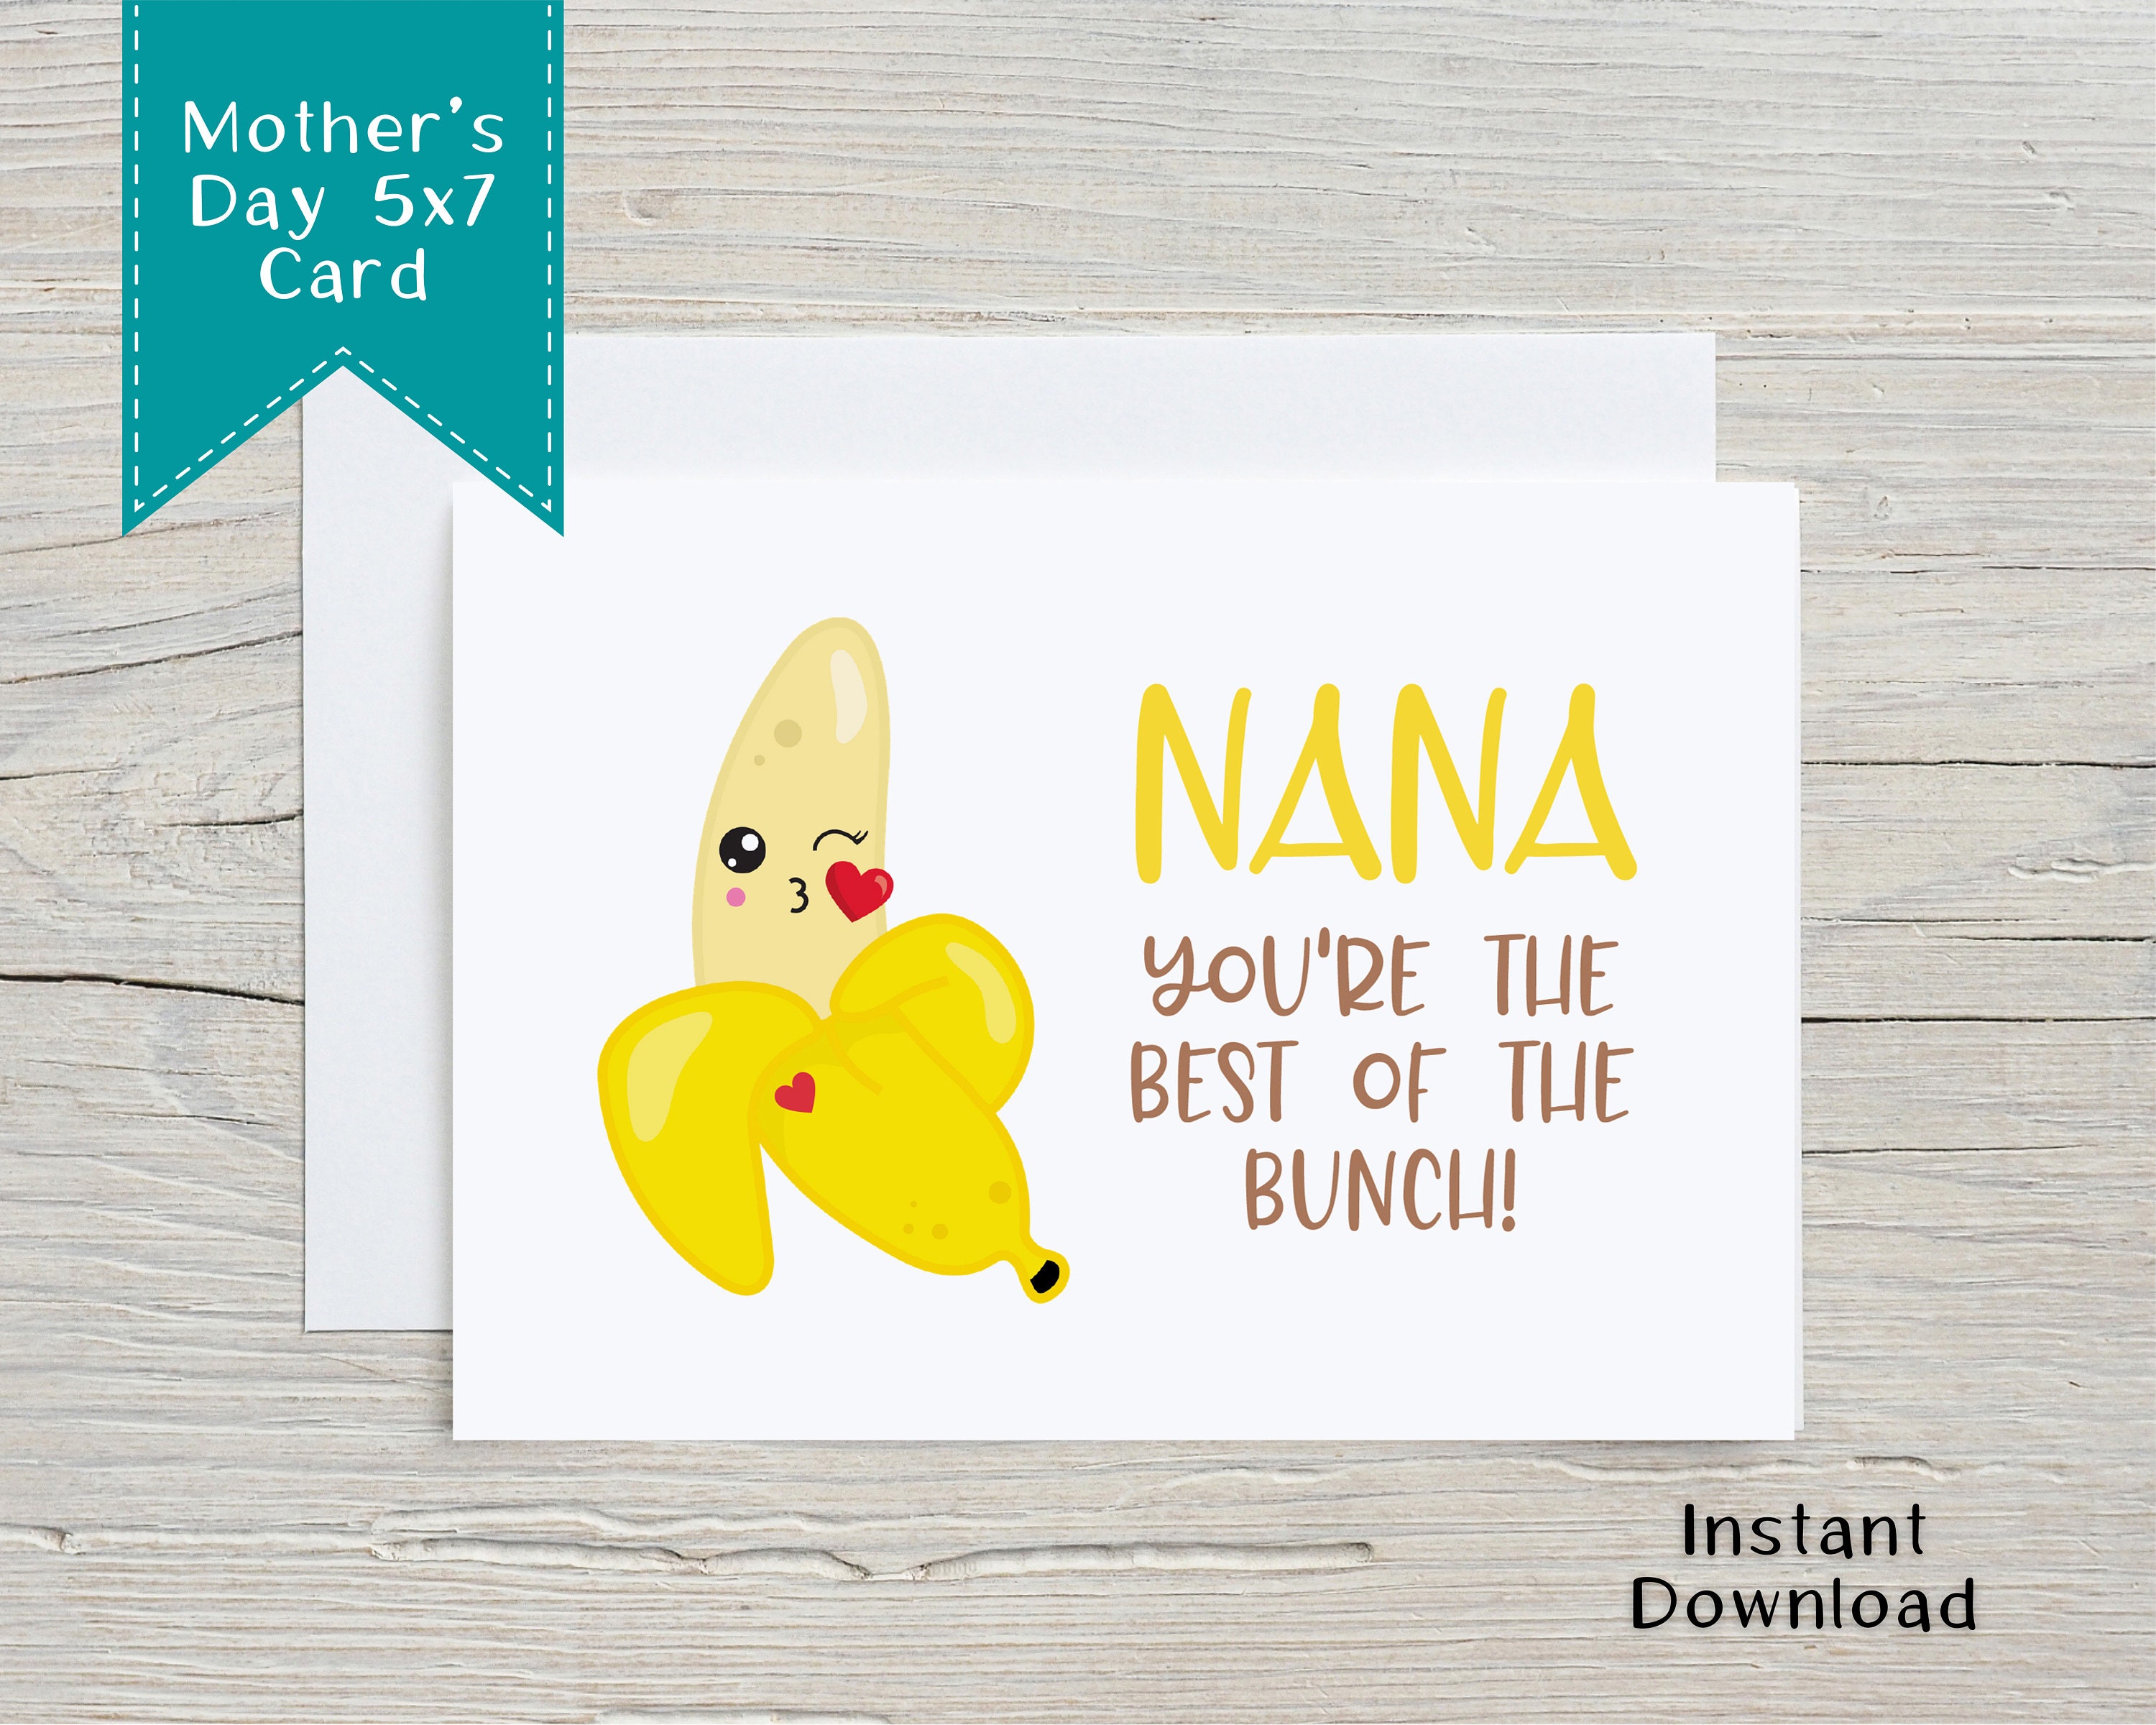 Printable Chocolates Mother's Day 5x7 Card